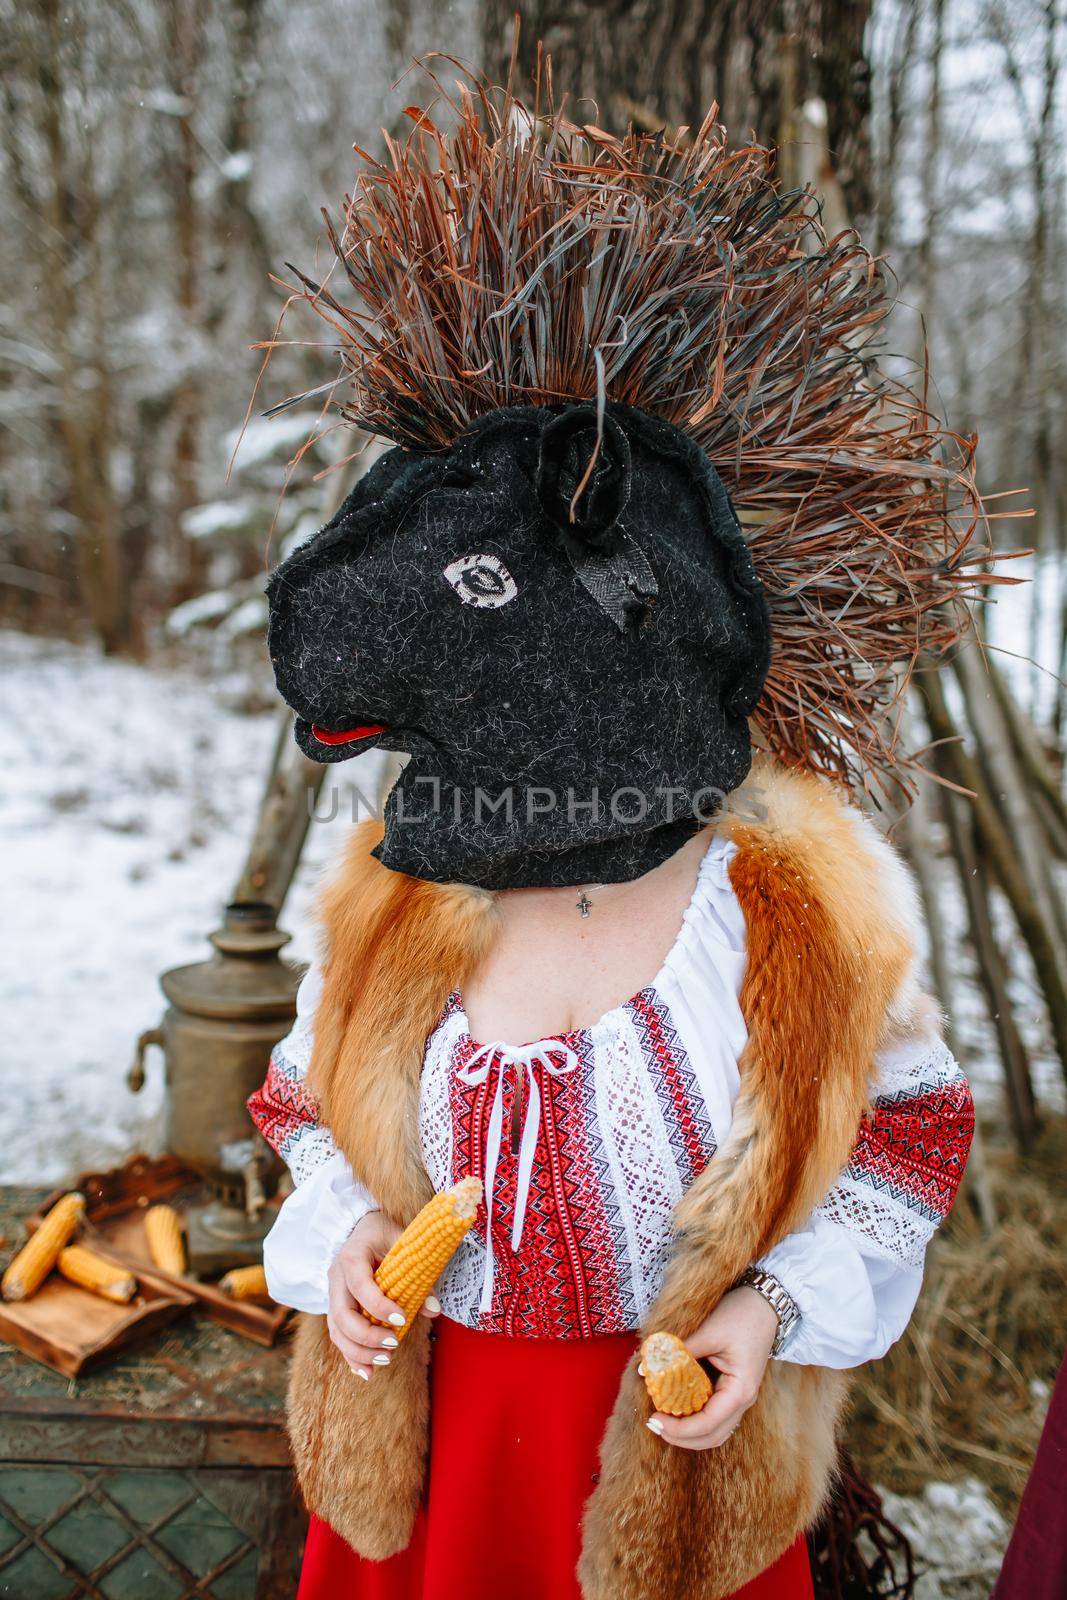 A man in a national costume with the head of an animal celebrates the arrival of the pagan holiday Maslenitsa.